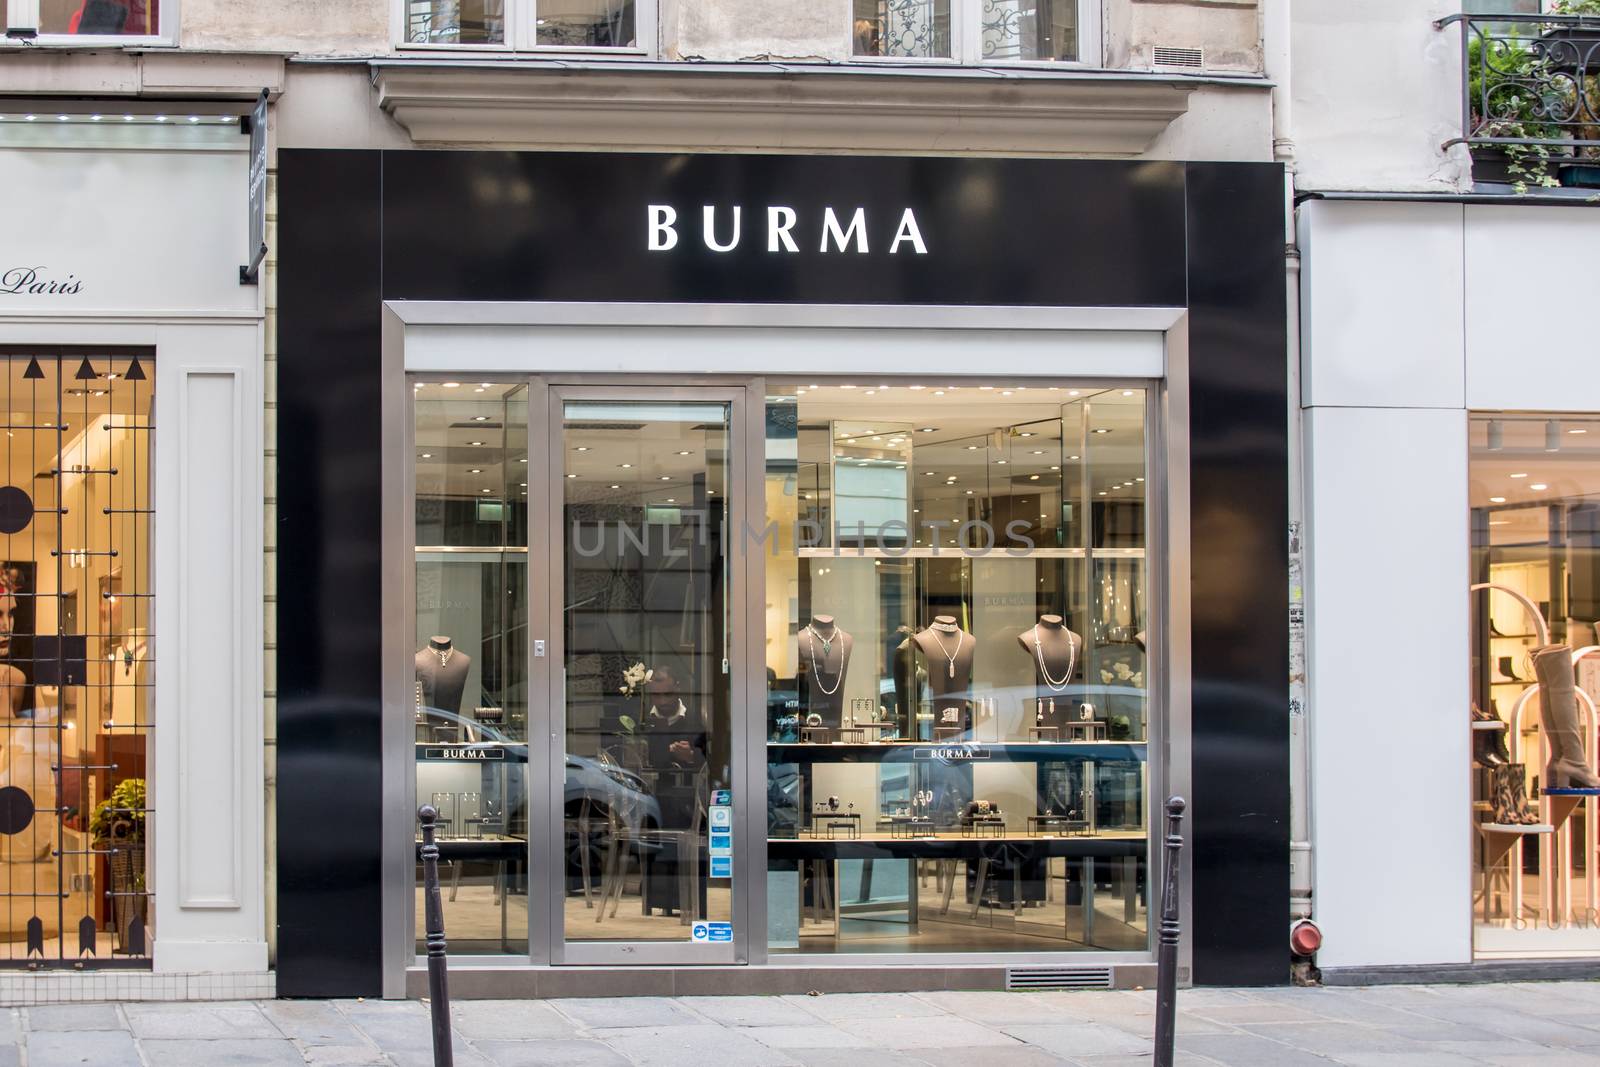 Shop facade on " Rue saint Honoré " of Burma Store in Paris, France, this brand is well known for Luxury jewels.